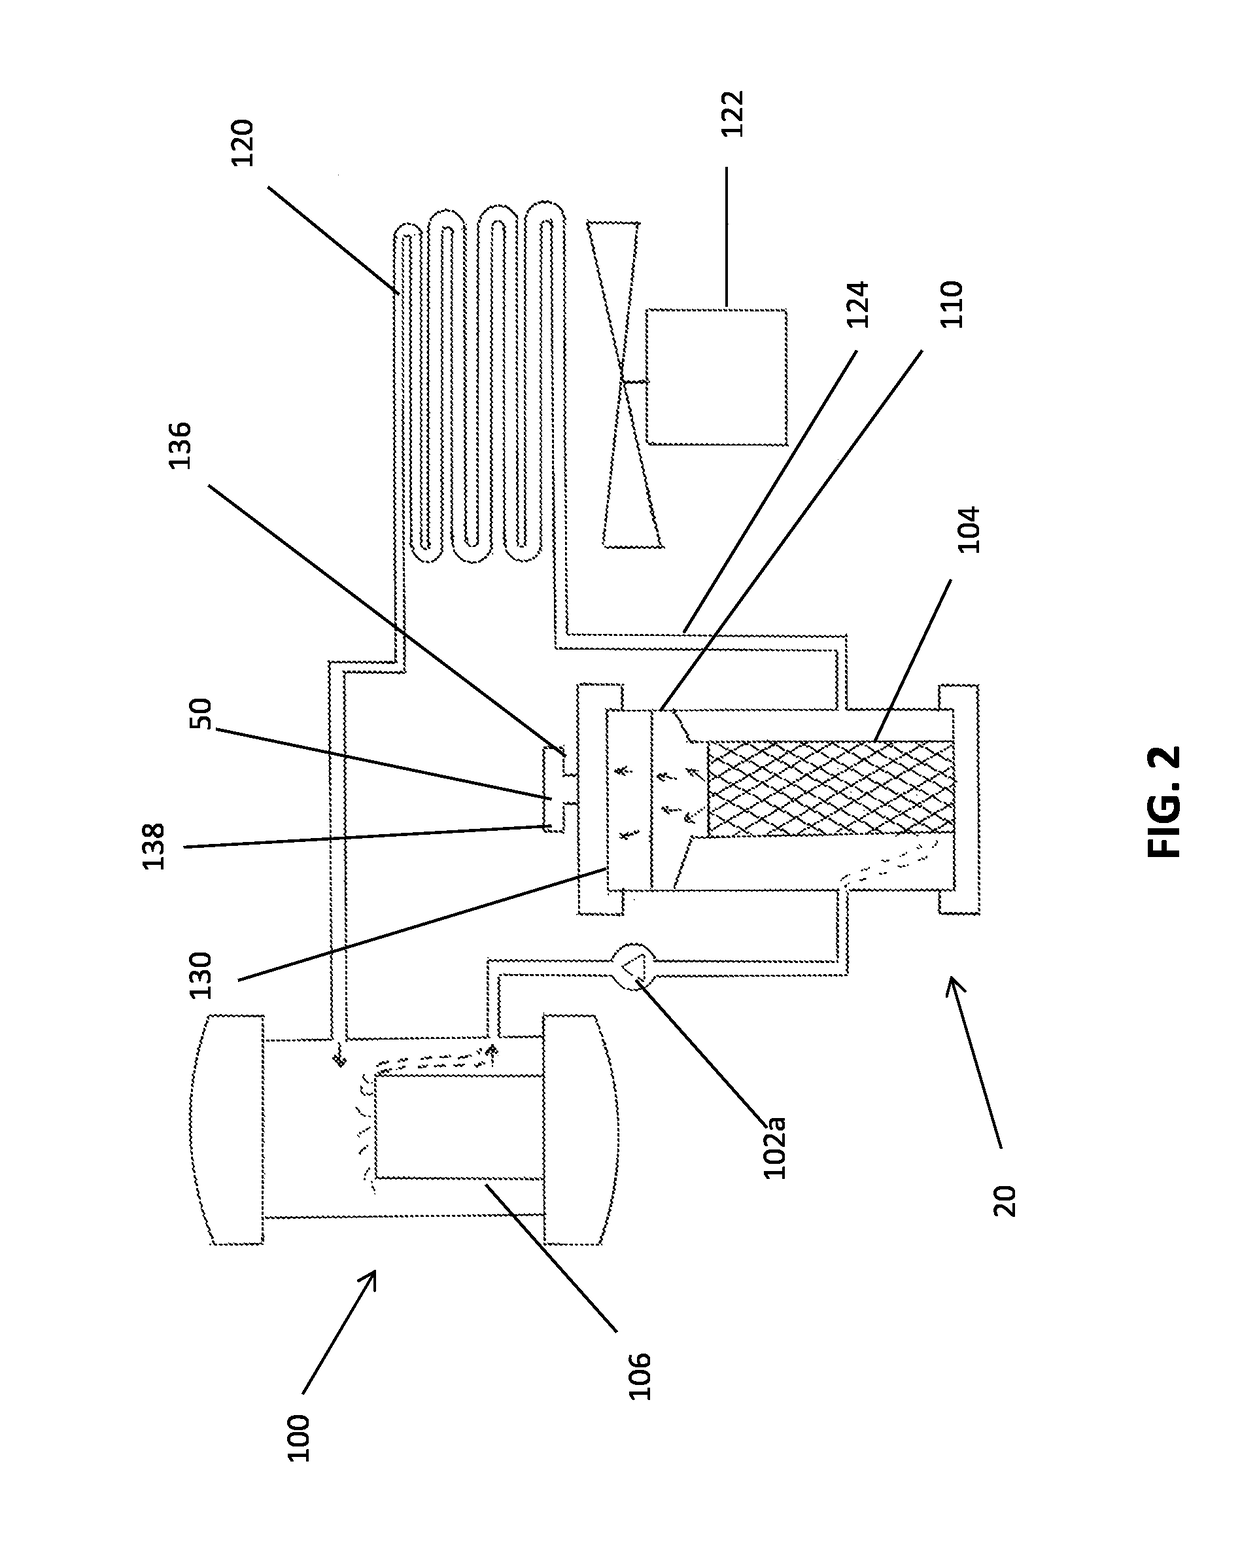 Method and system for using the by-product of electrolysis